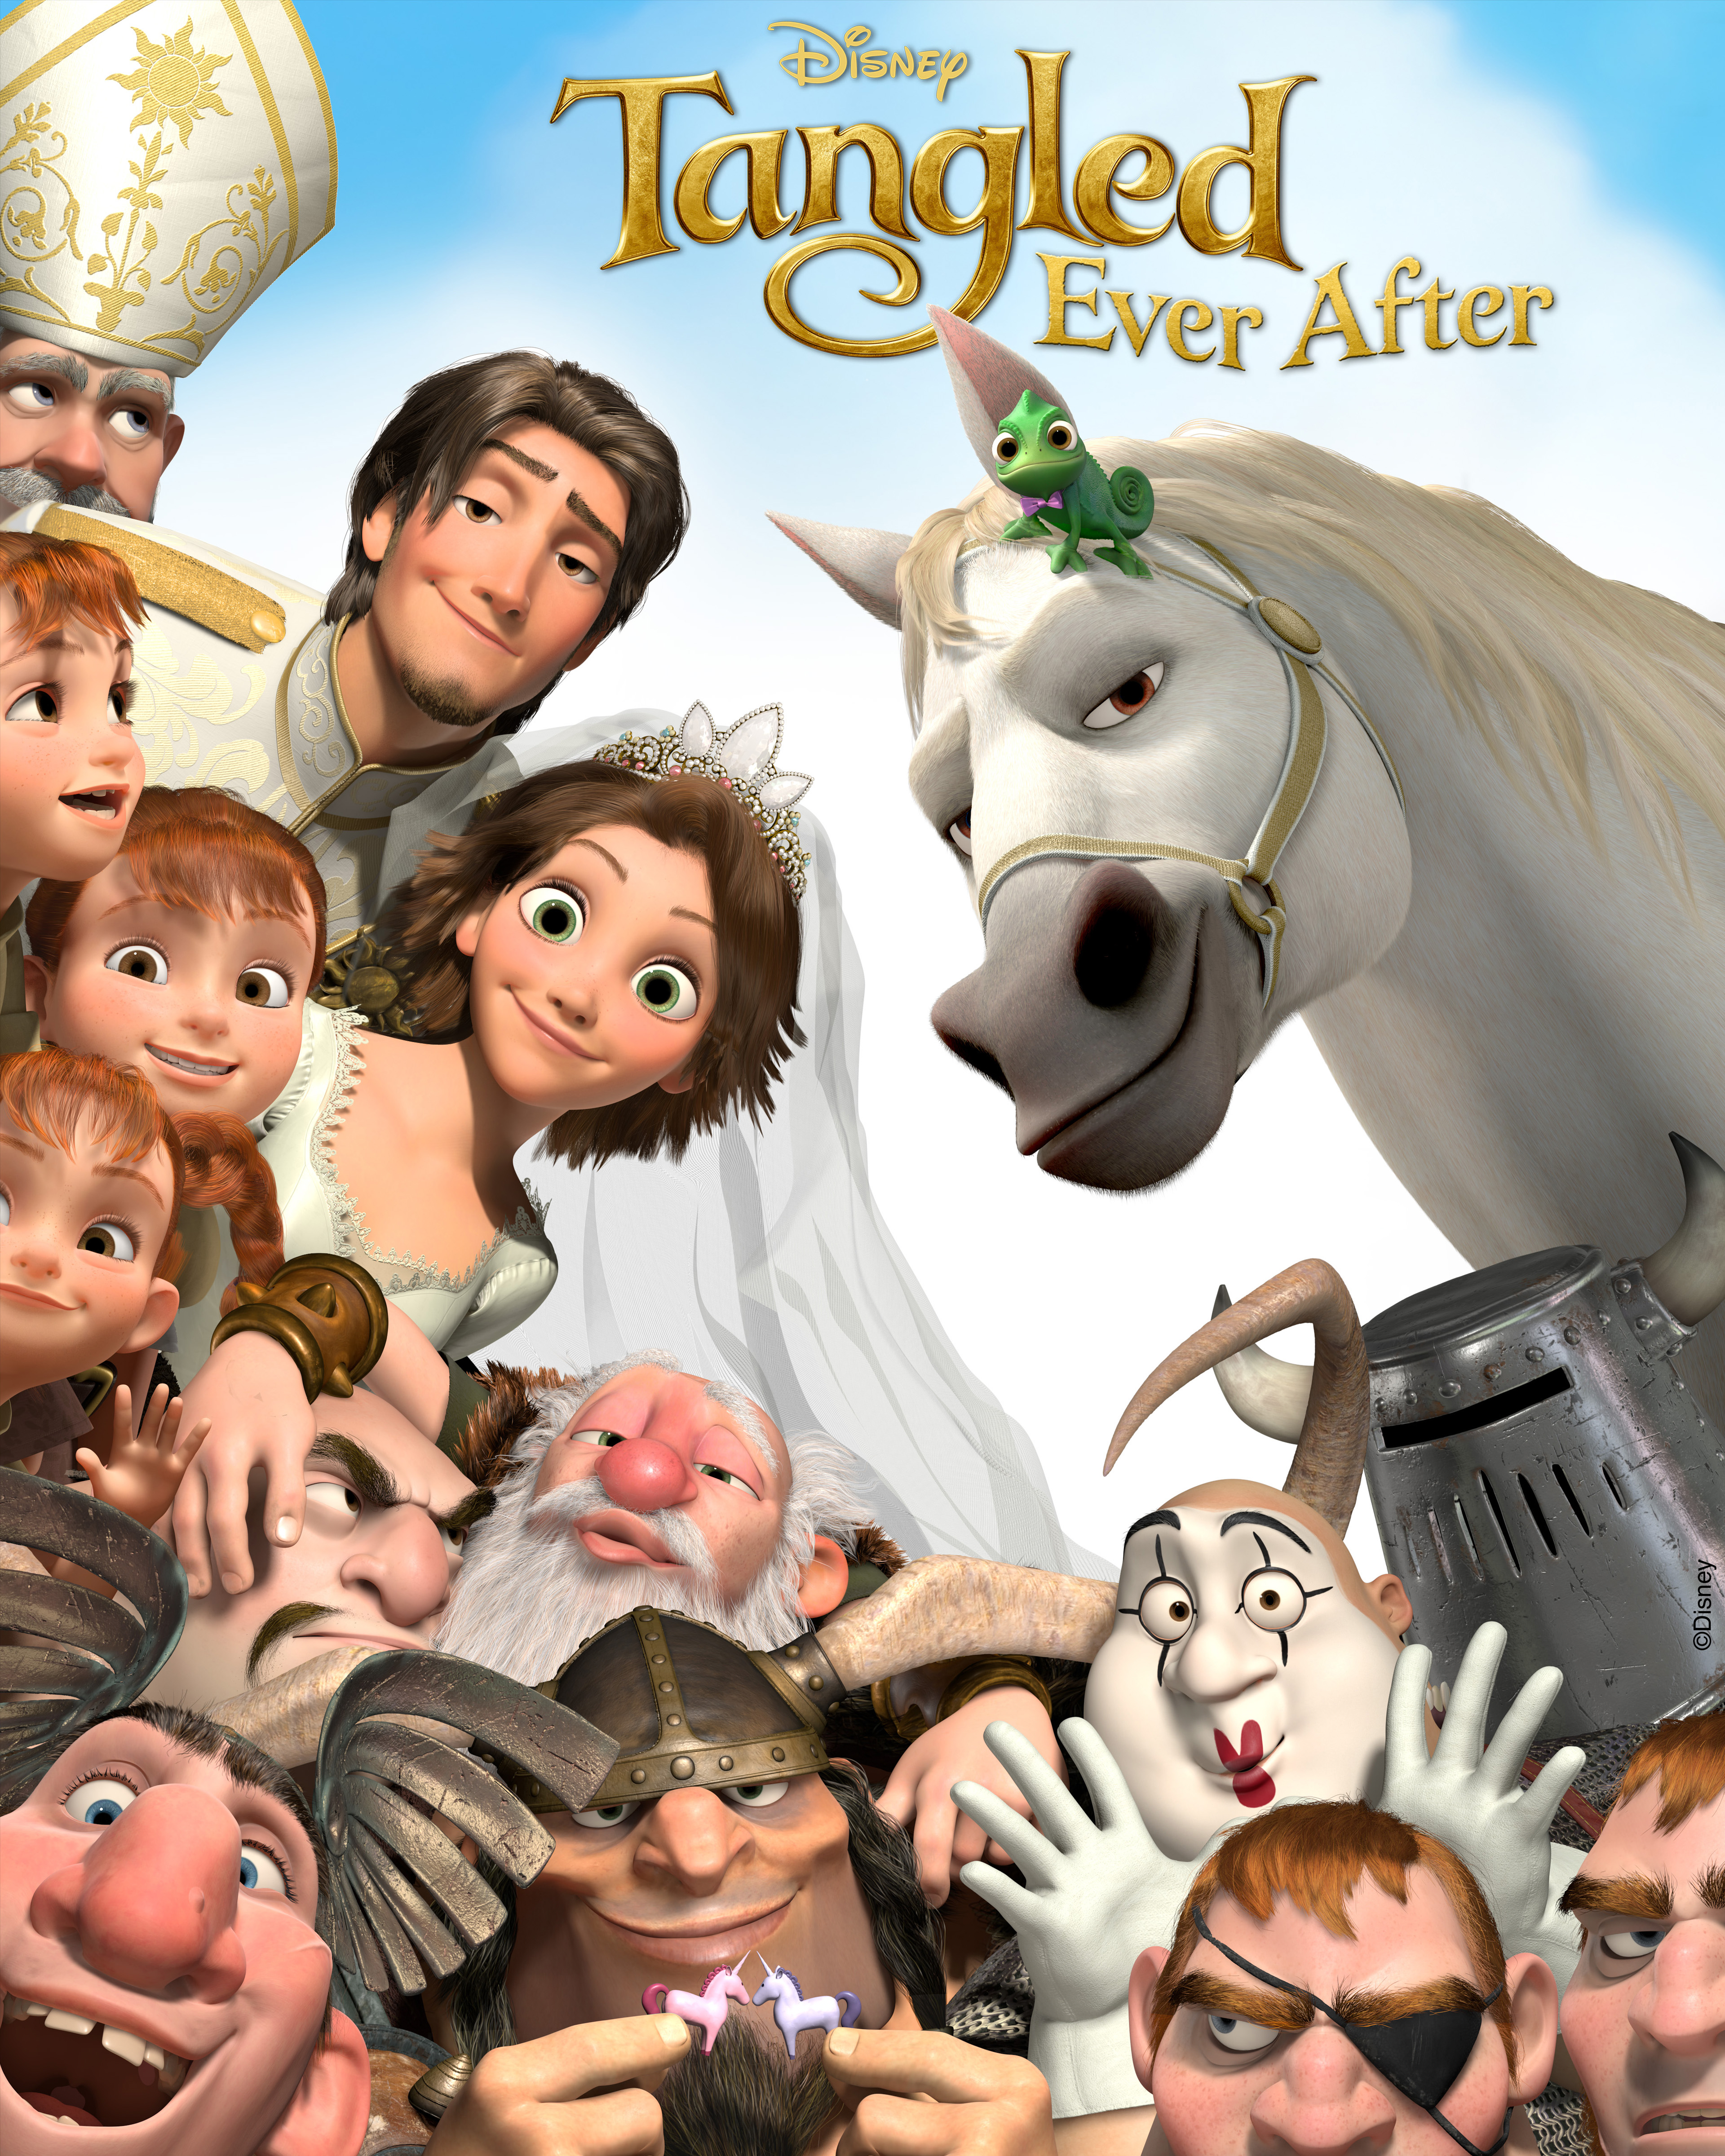 http://s6.picofile.com/file/8209179942/Tangled_Ever_After_Poster.jpg